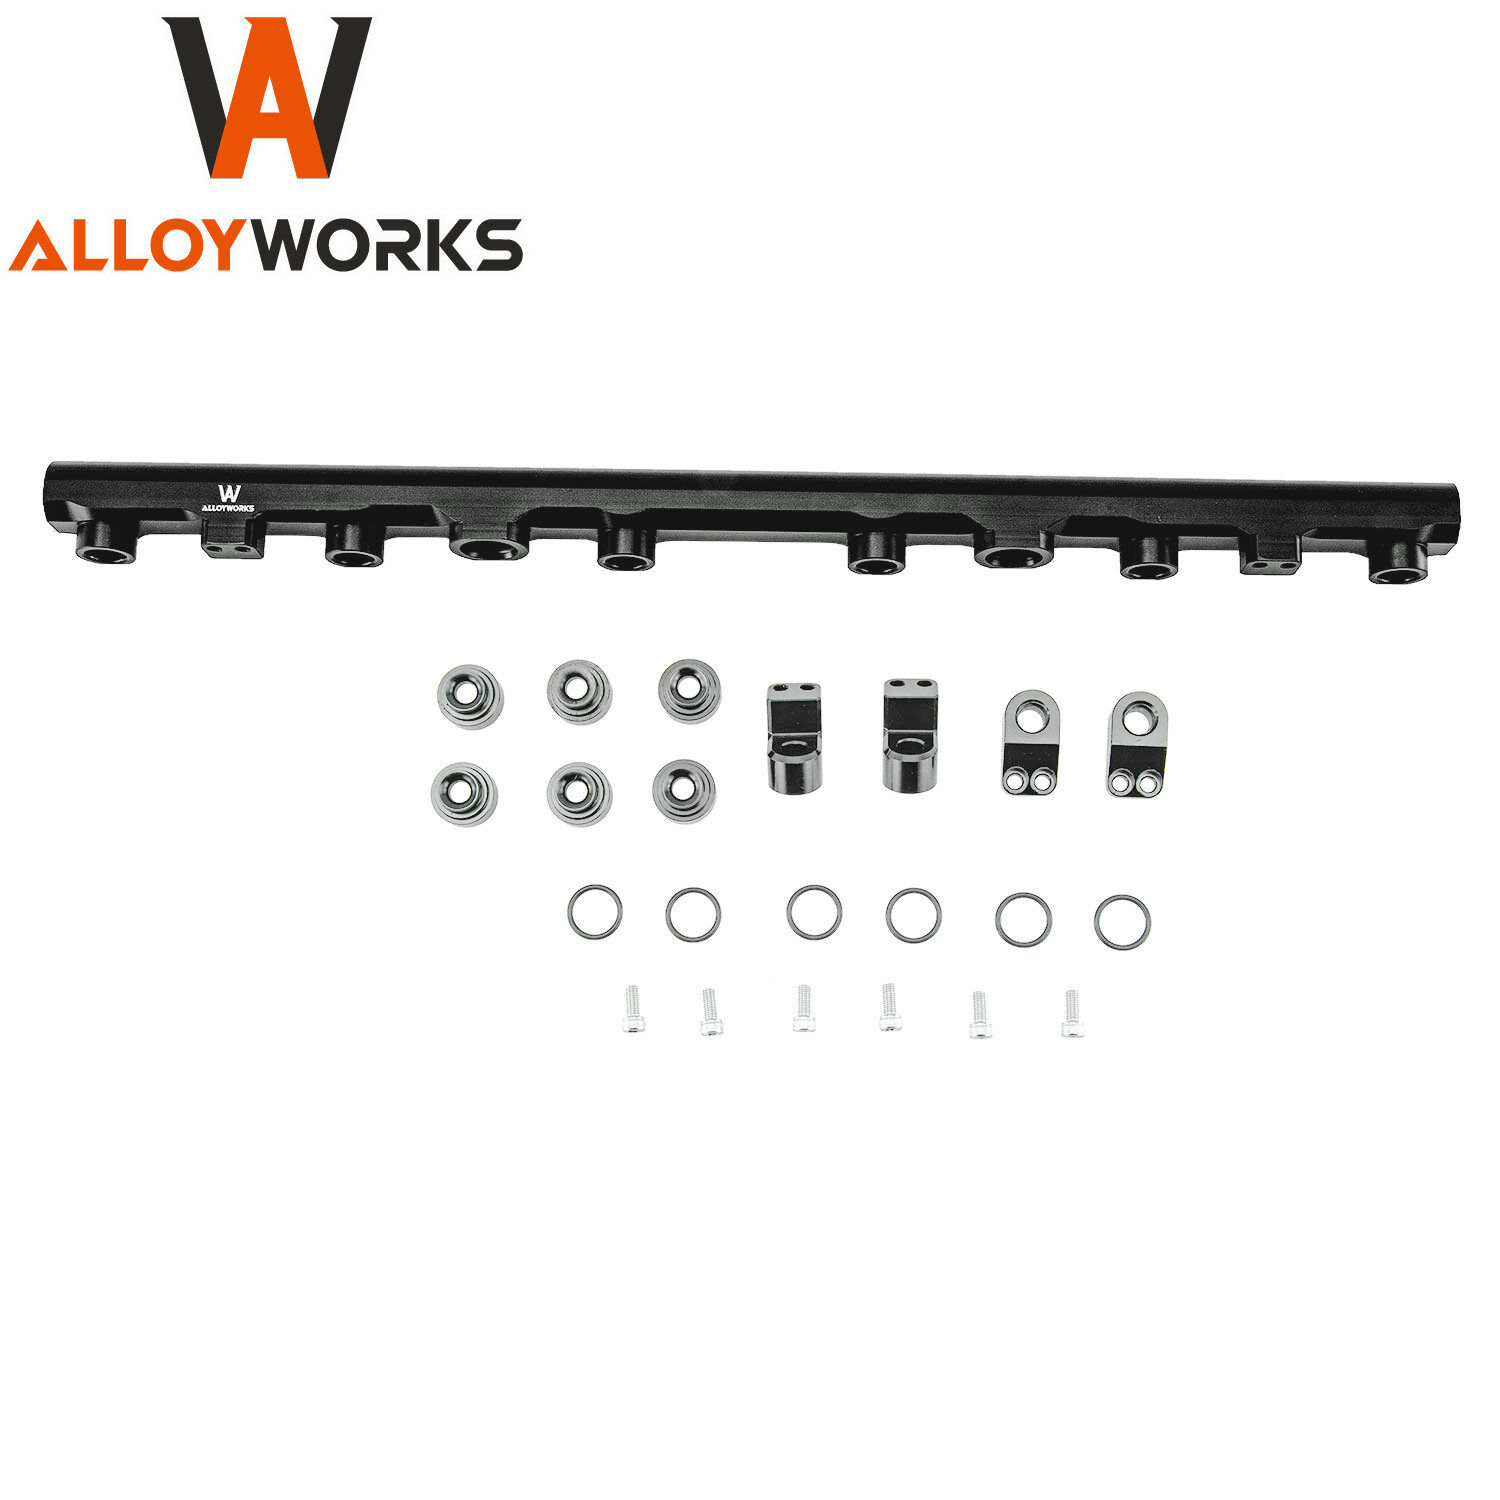 Top Feed Fuel Rail Conversion kit For 1993-1998 Toyota Supra turbo 3.0 2JZ-GTE